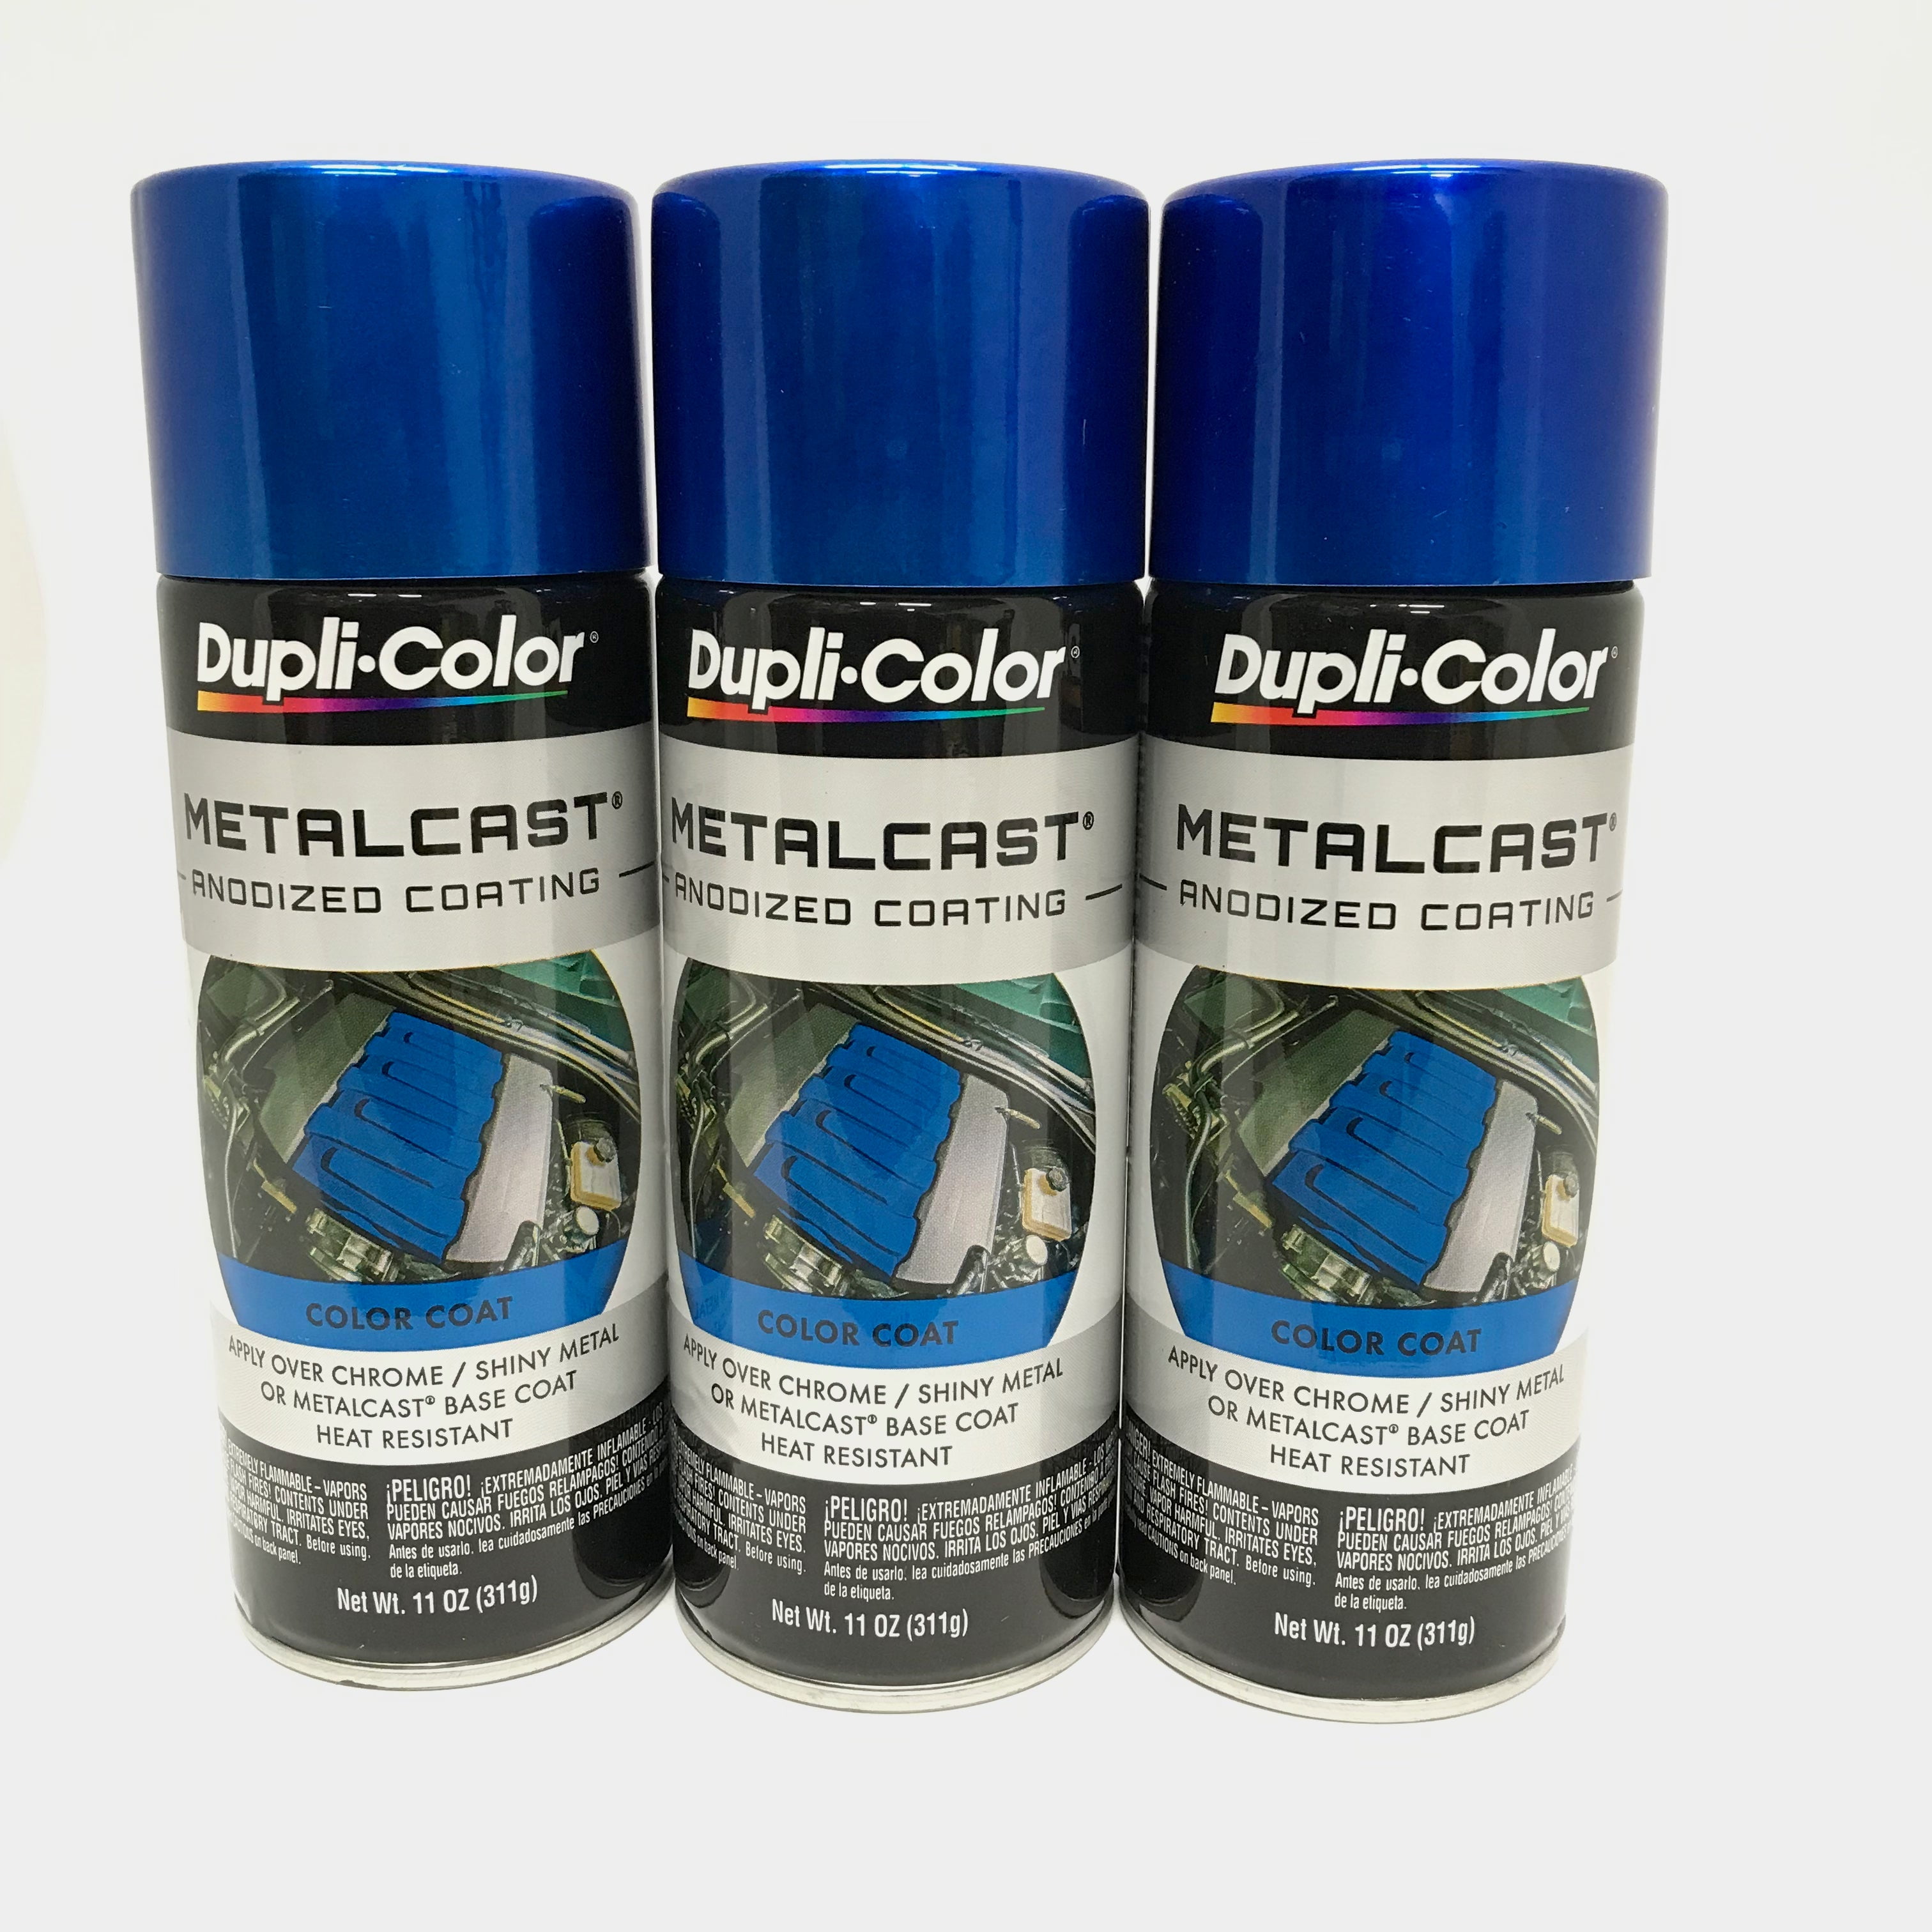 Stainless Steel Coating – Duplicolor